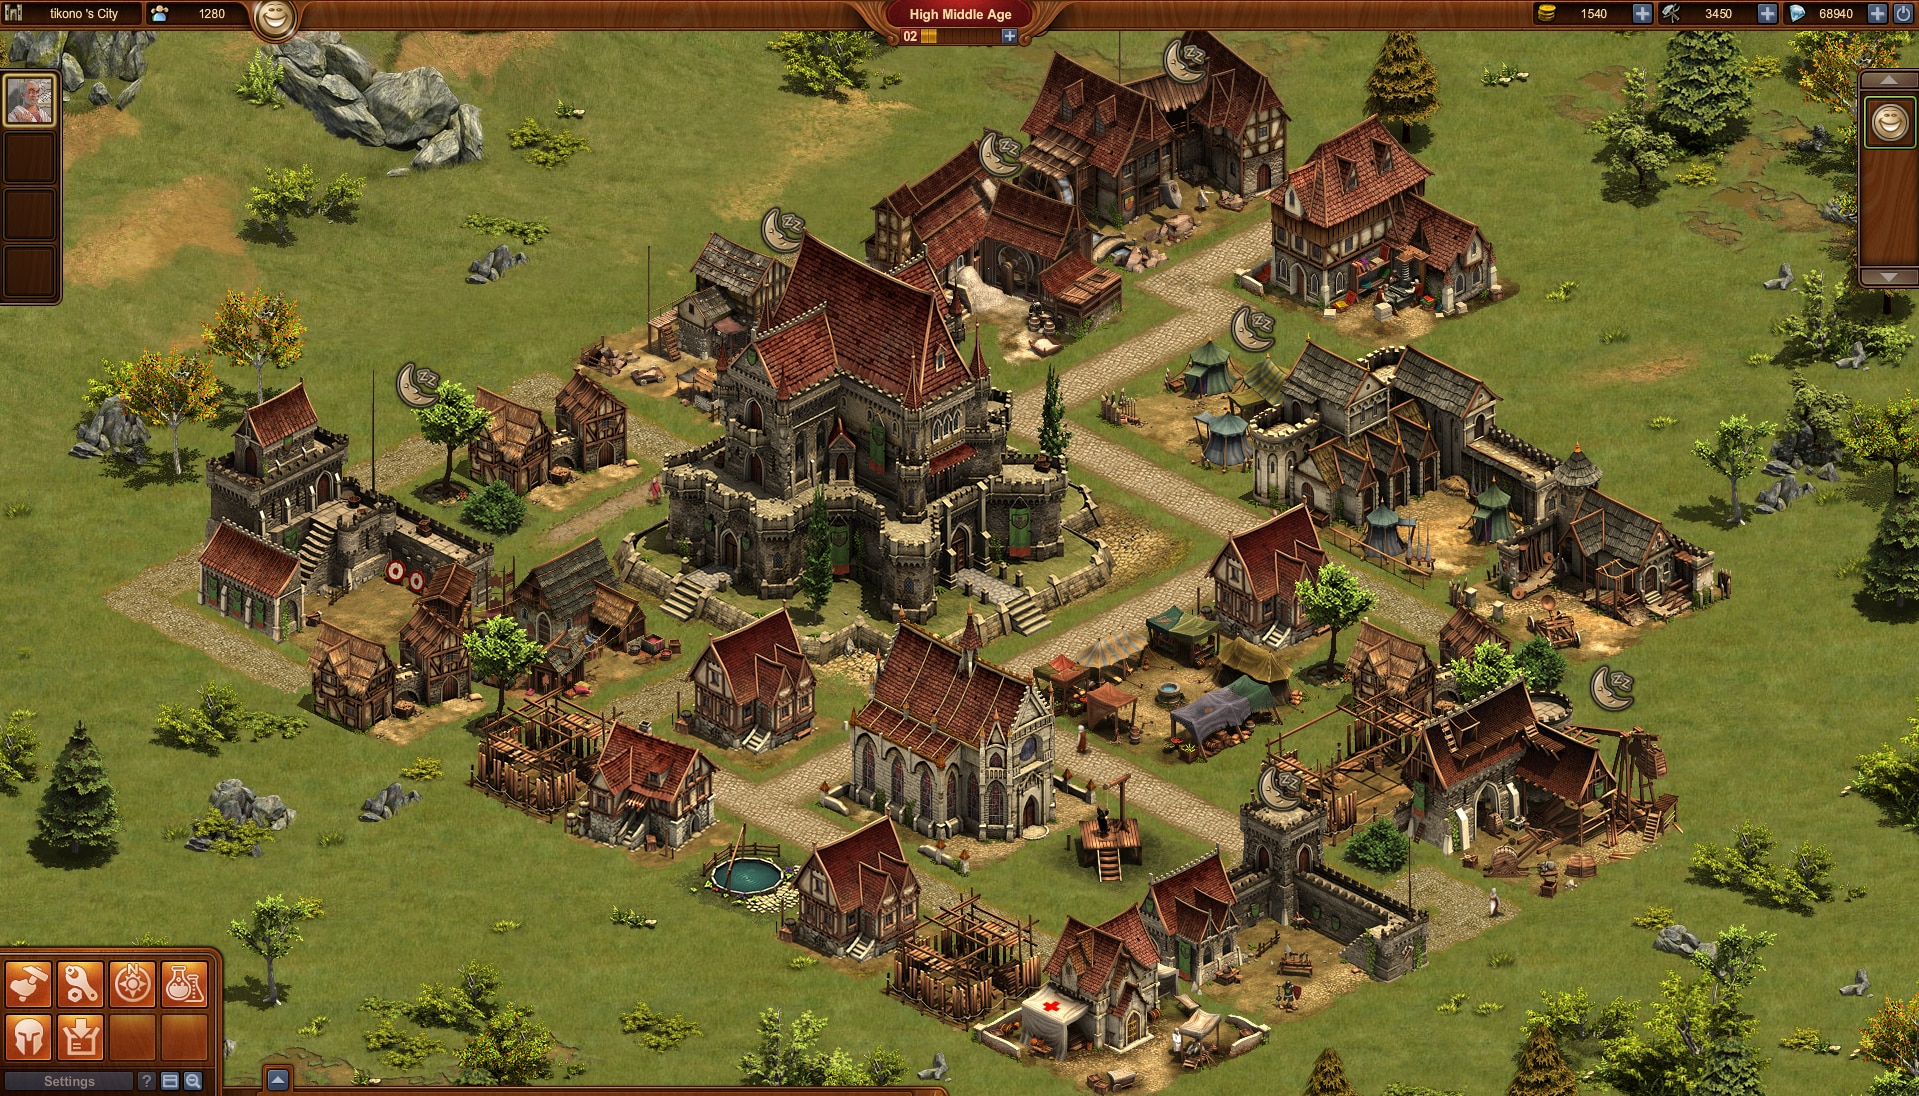 what is an event building in forge of empires